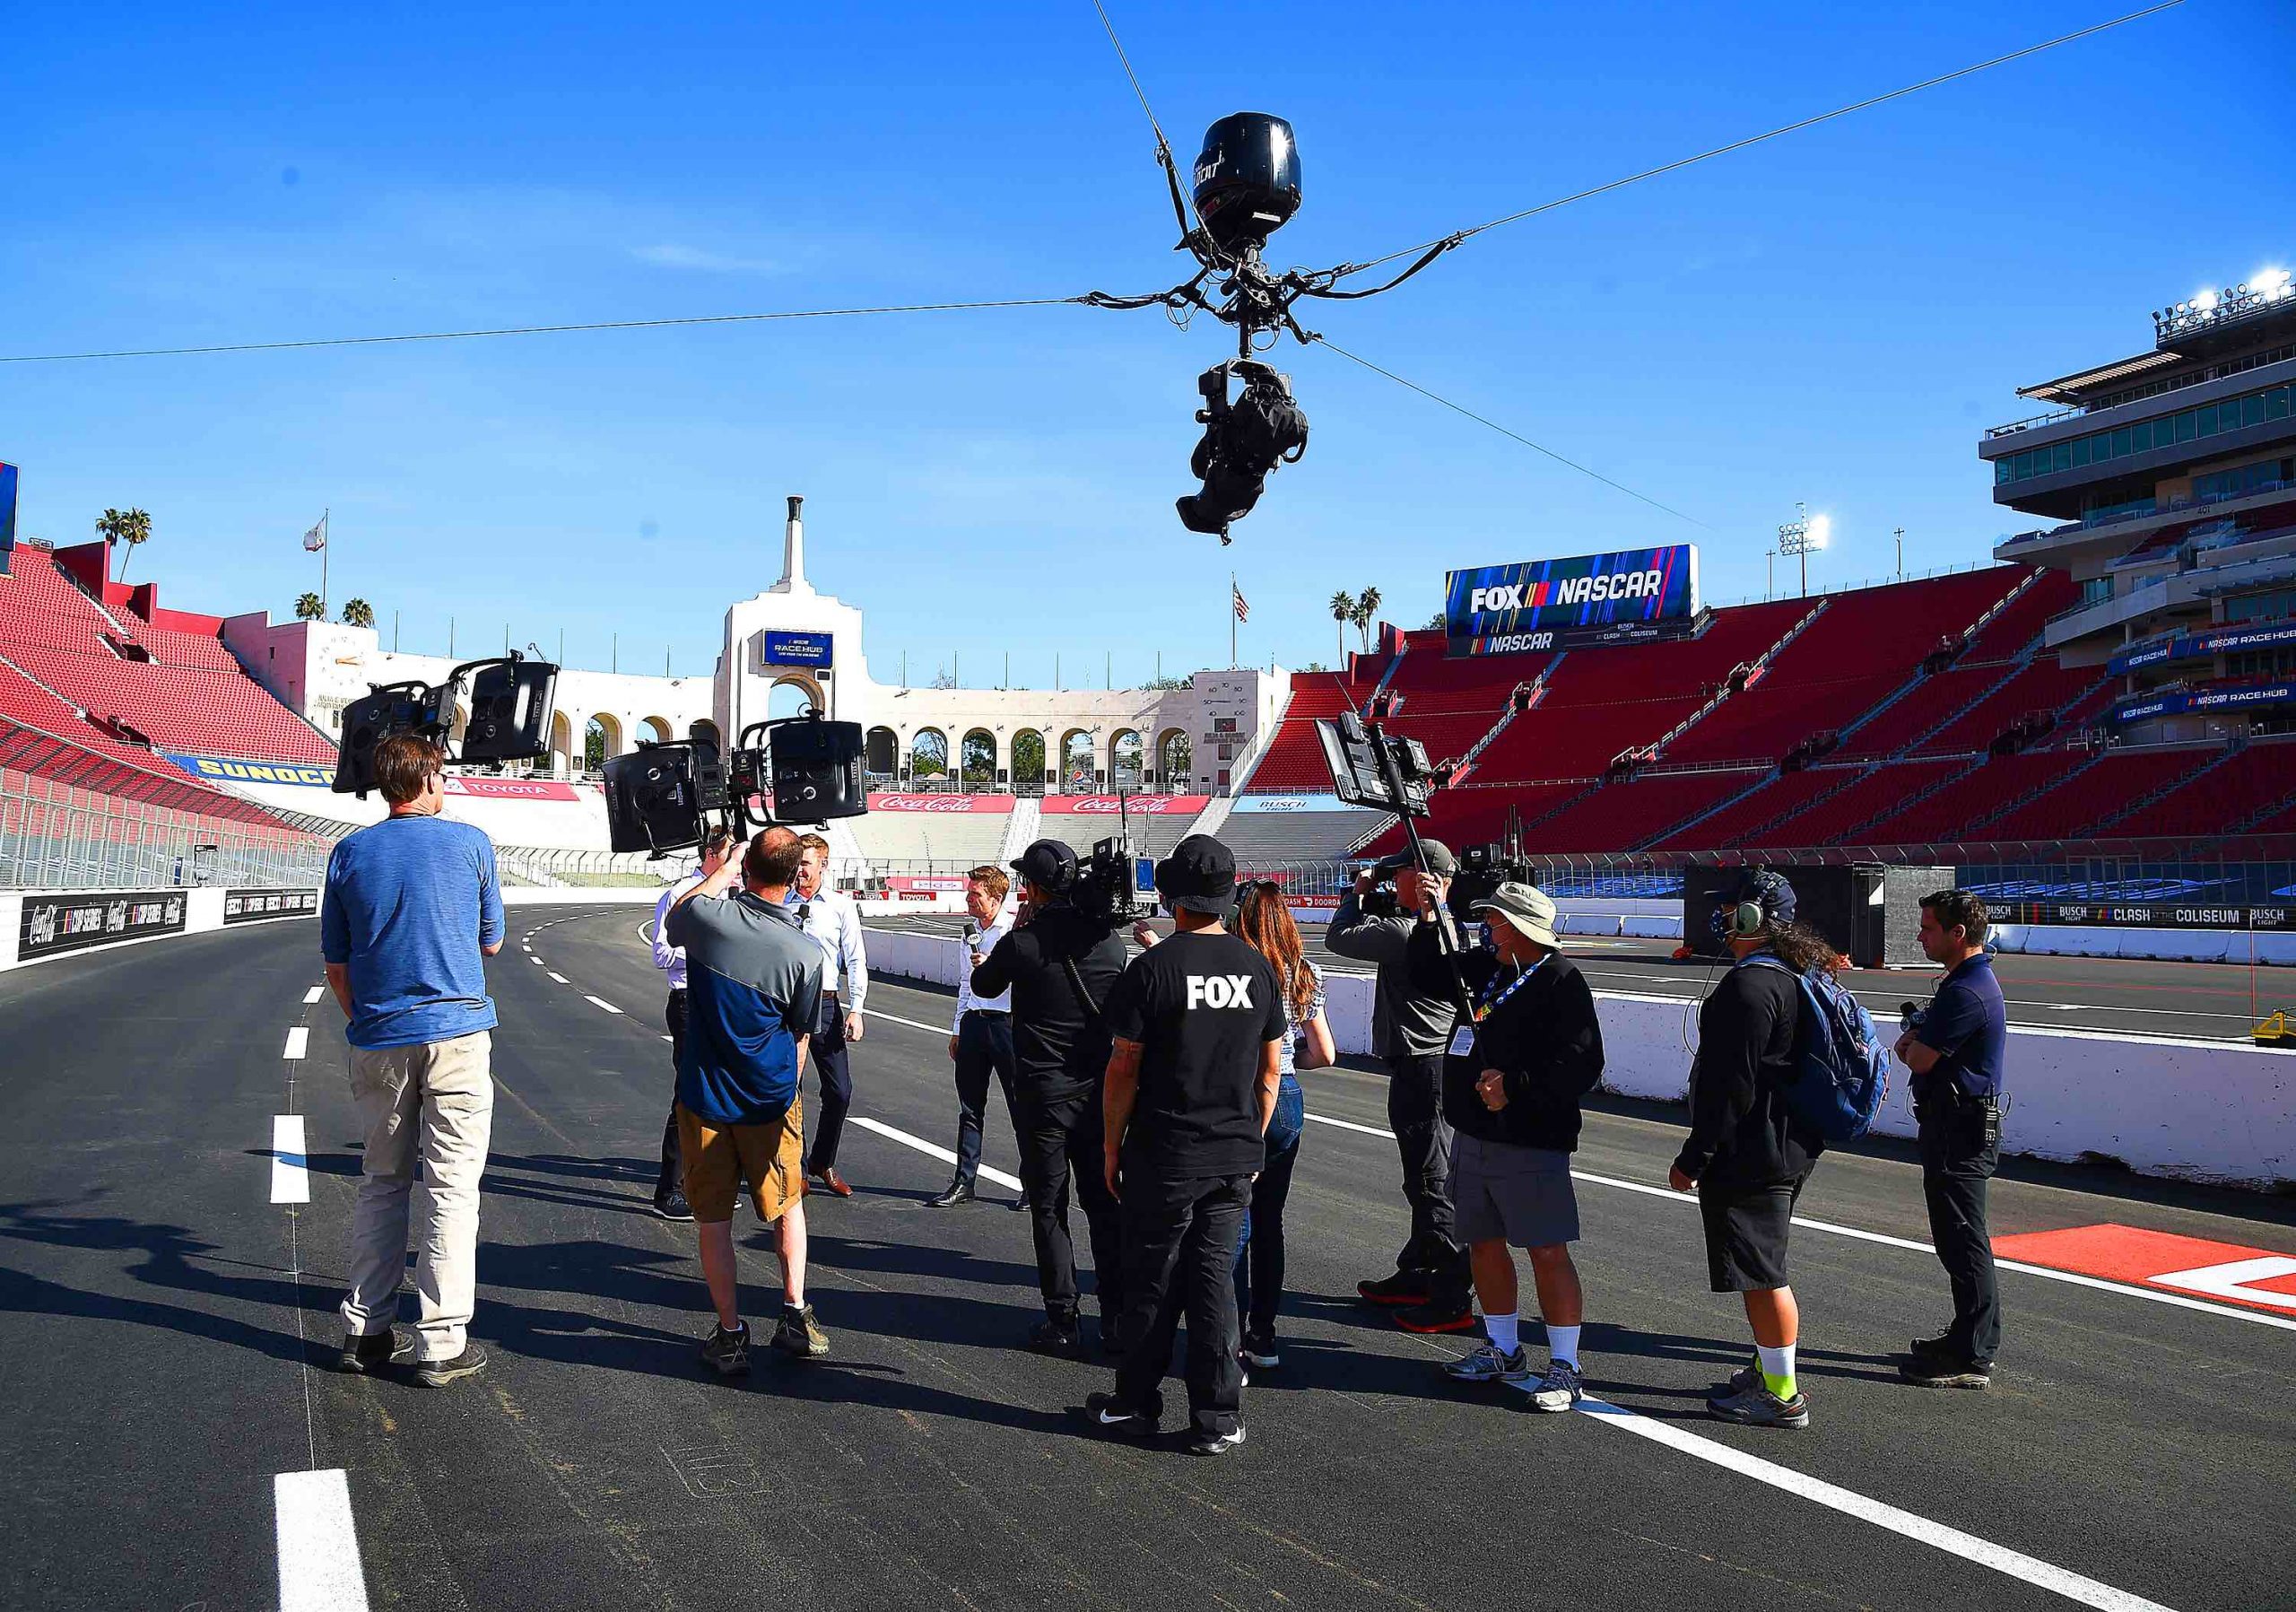 NASCAR Clash at the Coliseum Fox Sports Goes All Out With 1080p HDR Workflows at Historic Venue